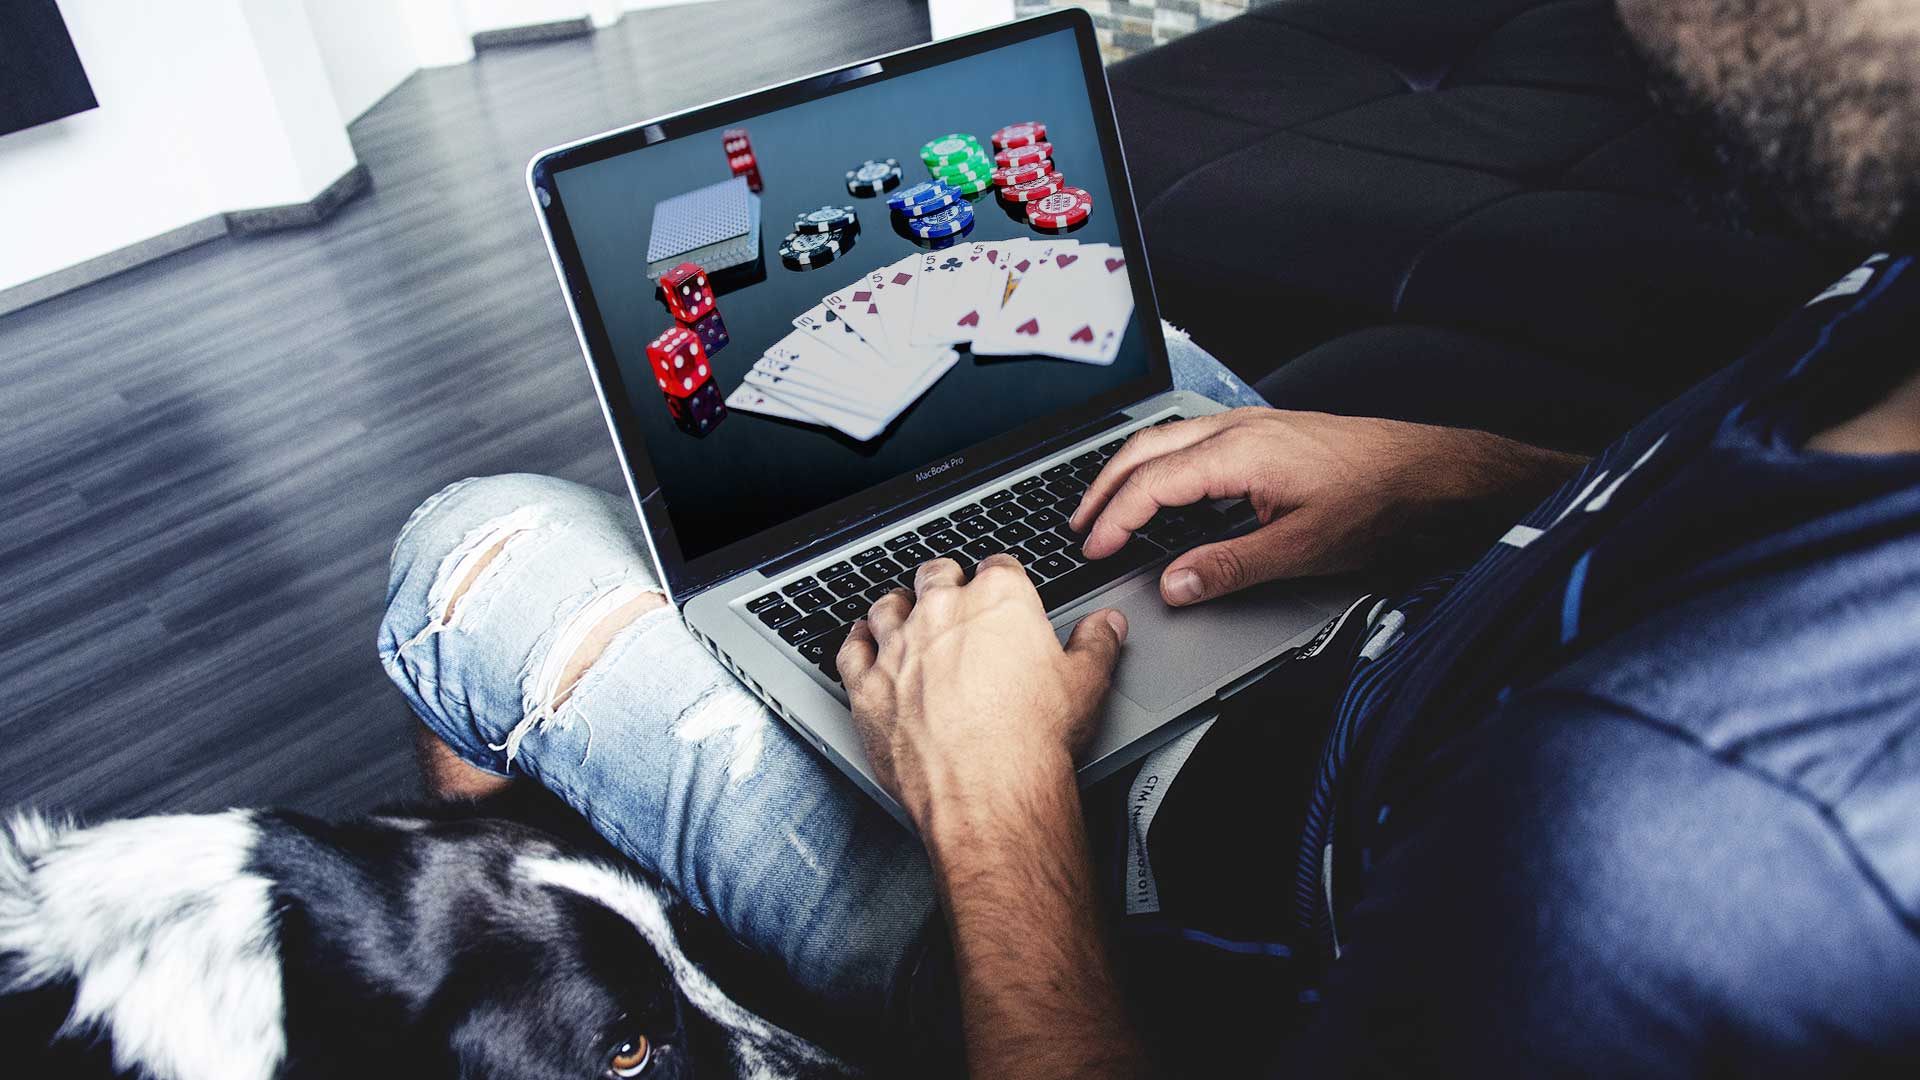 How Online Gambling Has Put A New Kind Of Earning Power In The Public’s Hands